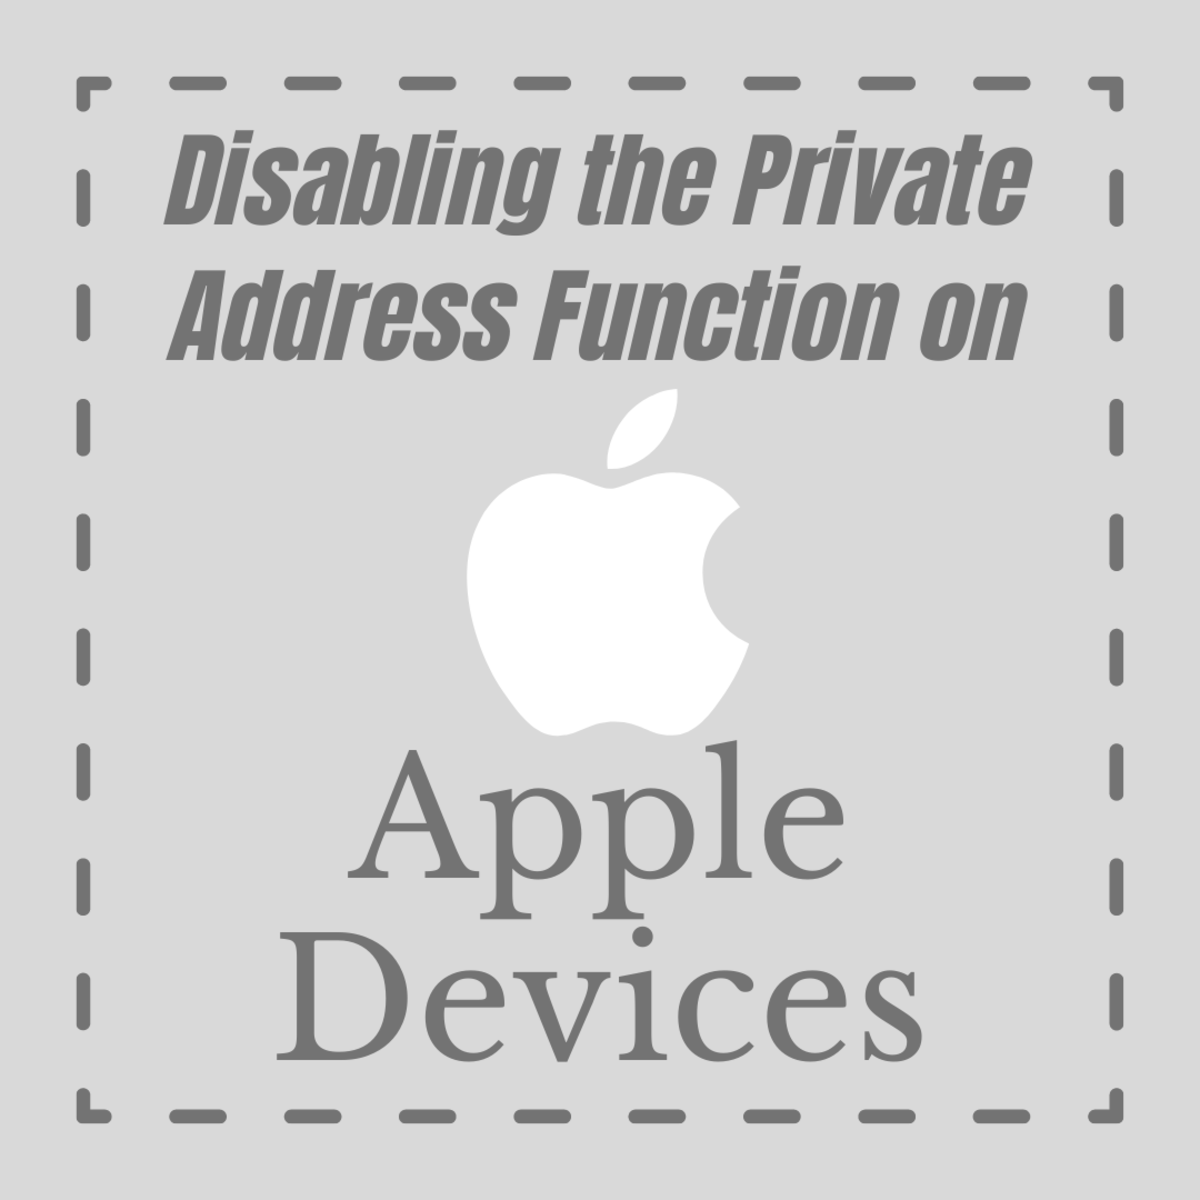 How to Turn Off Private Wifi Address on Macbook & iOS Devices